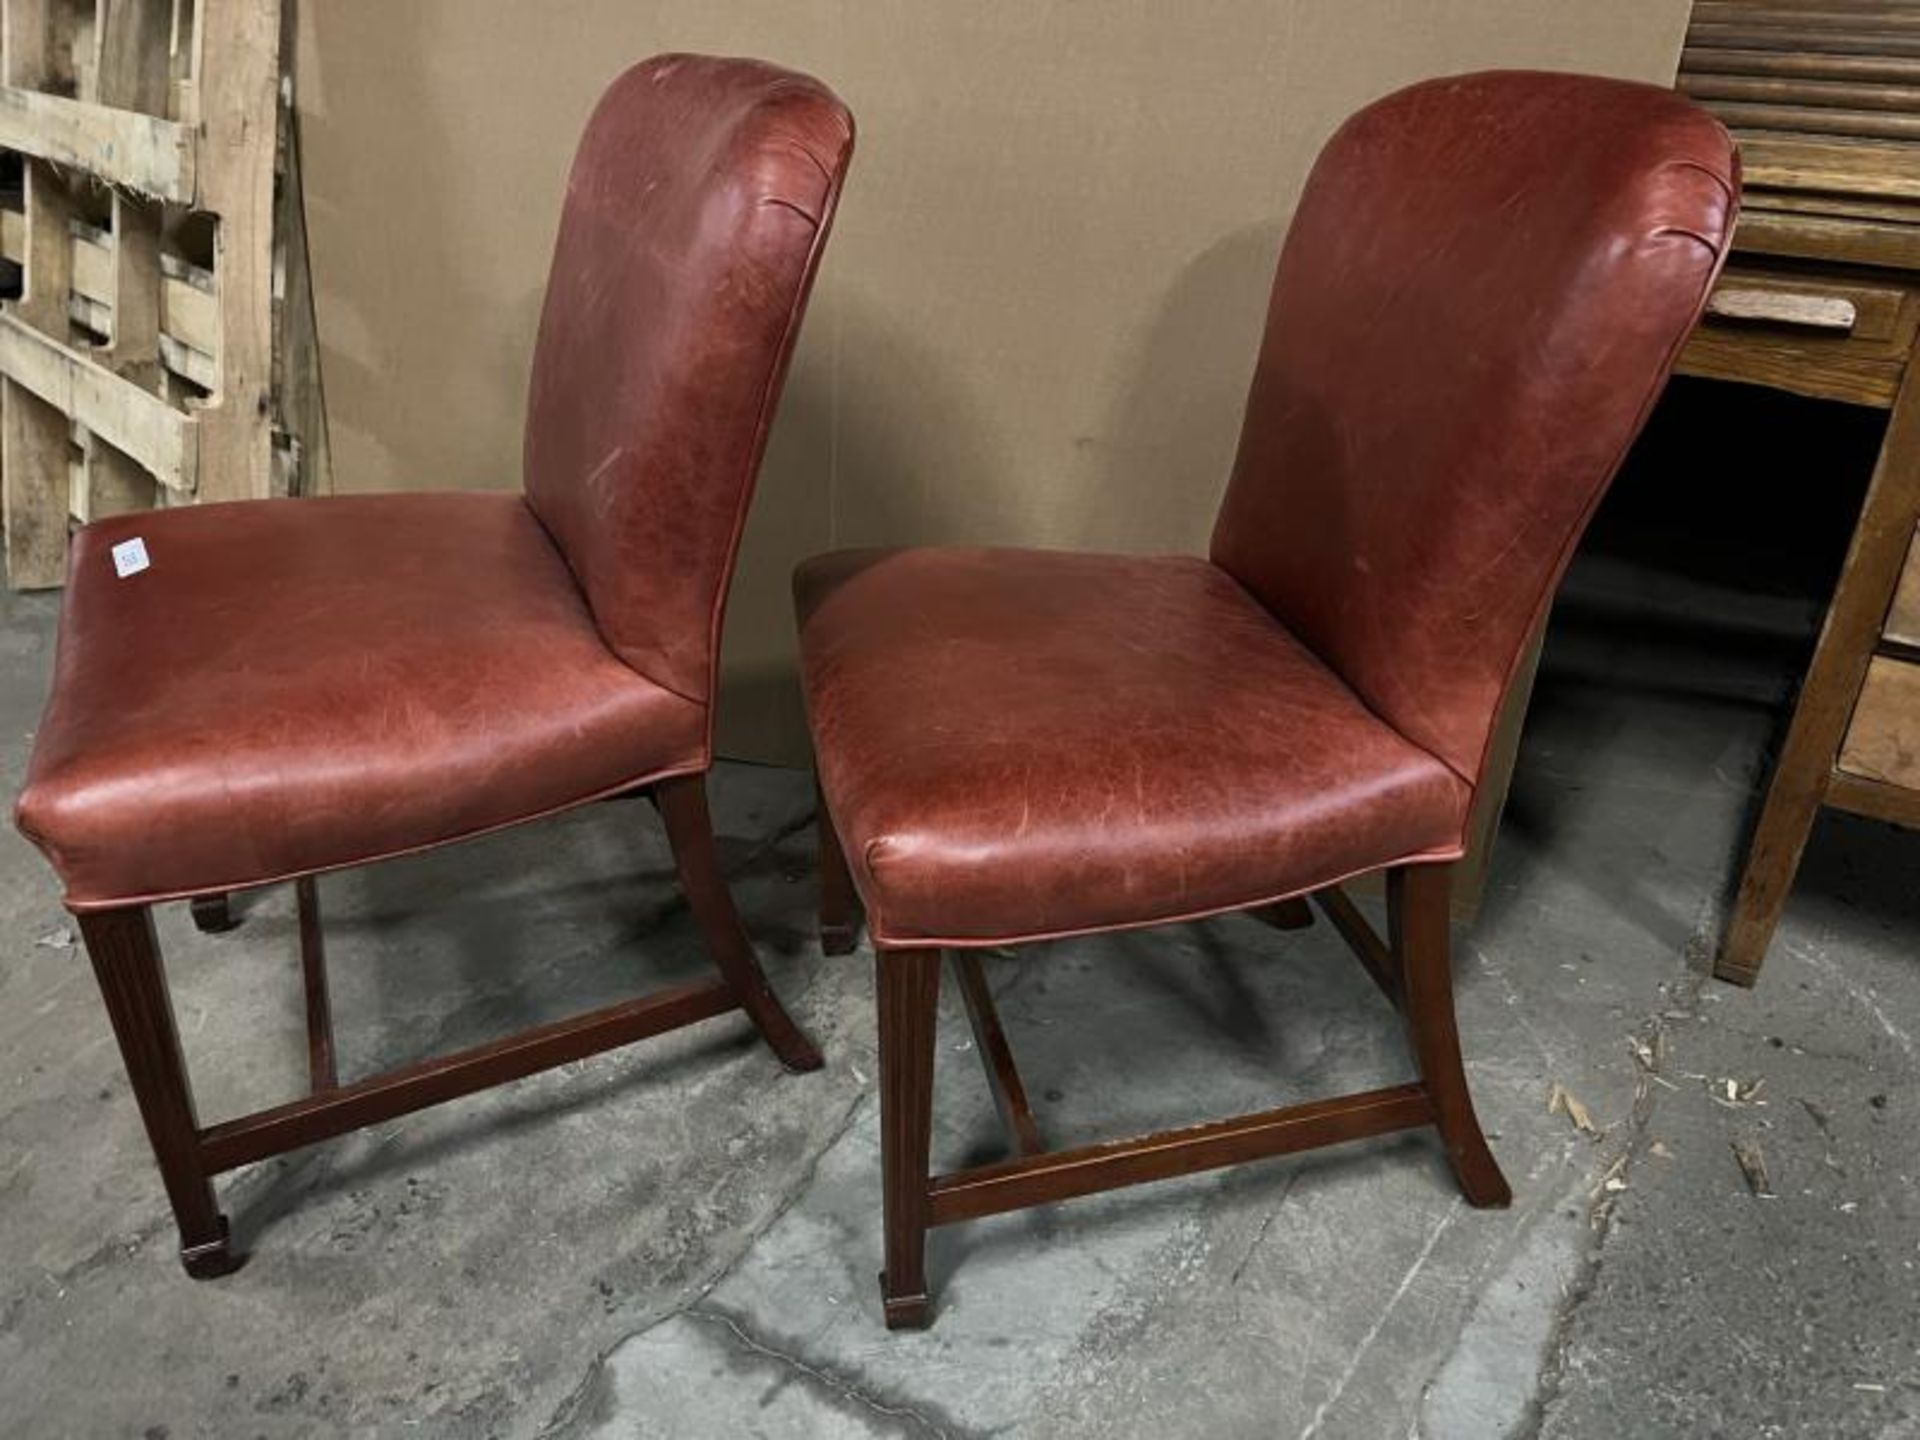 Pair of Red Vinyl Chairs; Located in Mill Building - Image 10 of 20